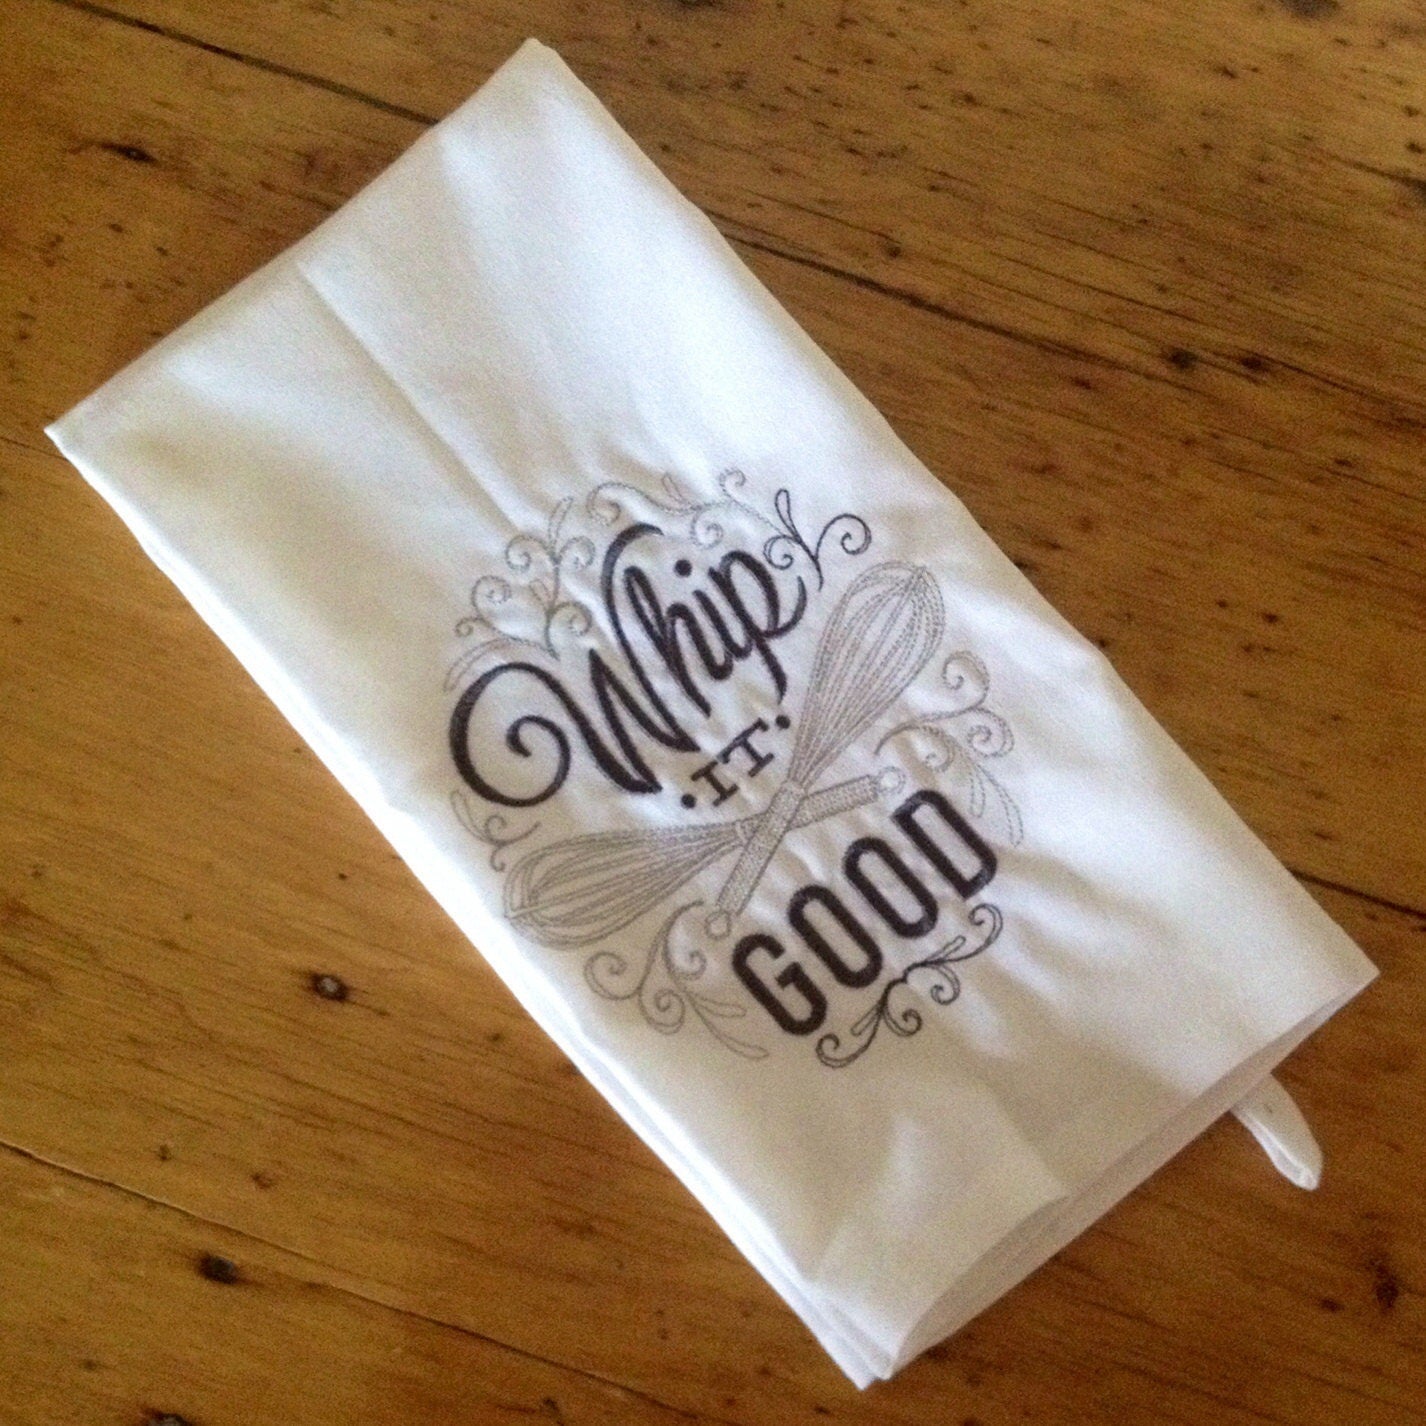 Whip It Good Embroidered Tea Towel Kitchen Towel